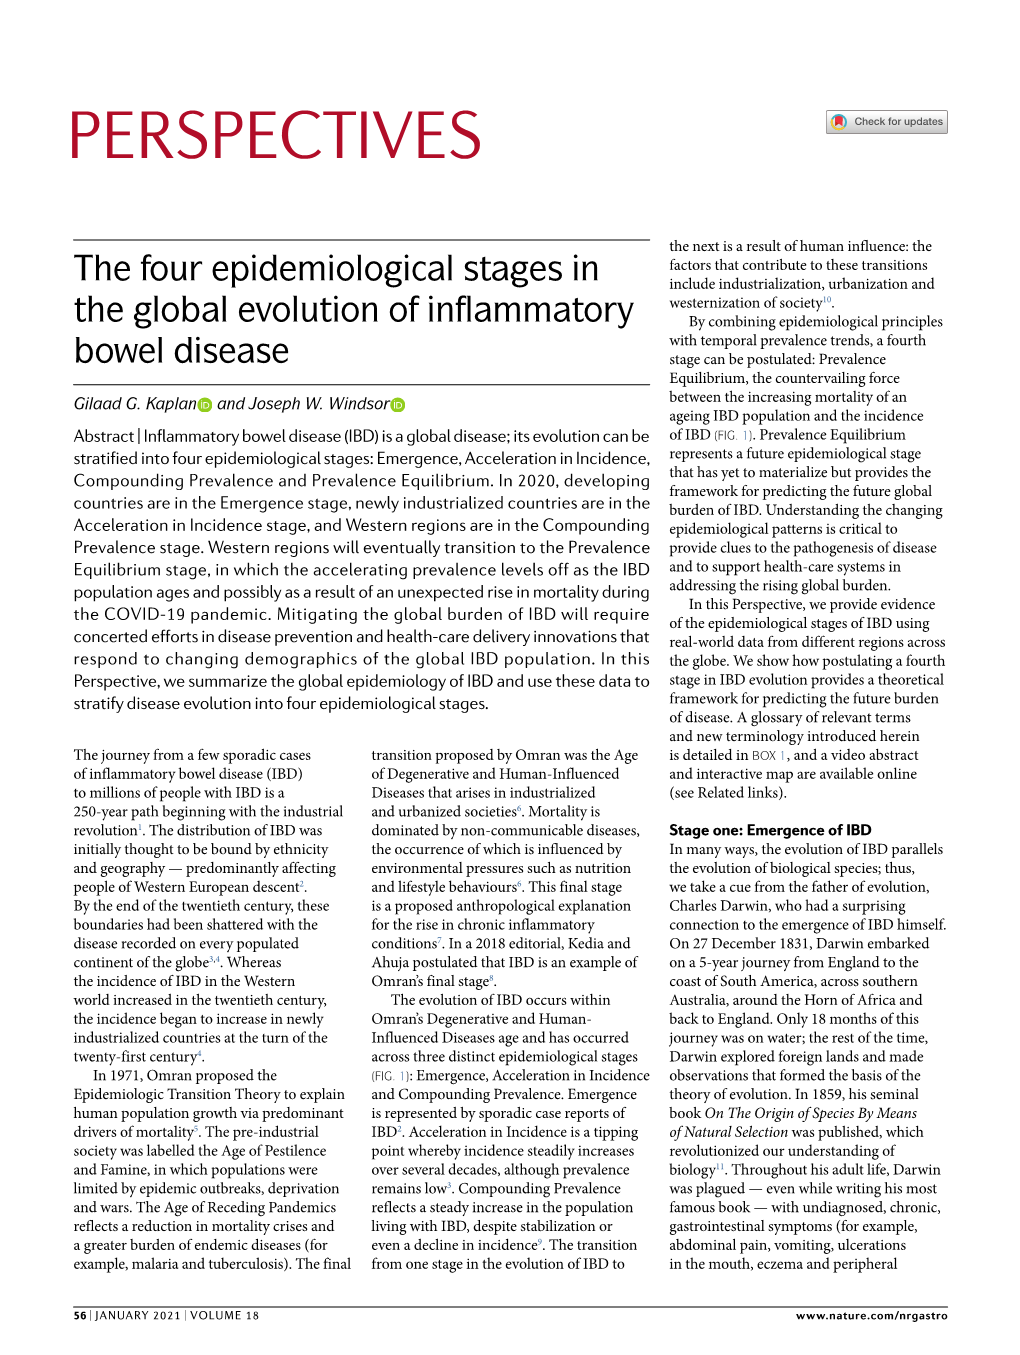 The Four Epidemiological Stages in the Global Evolution of Inflammatory